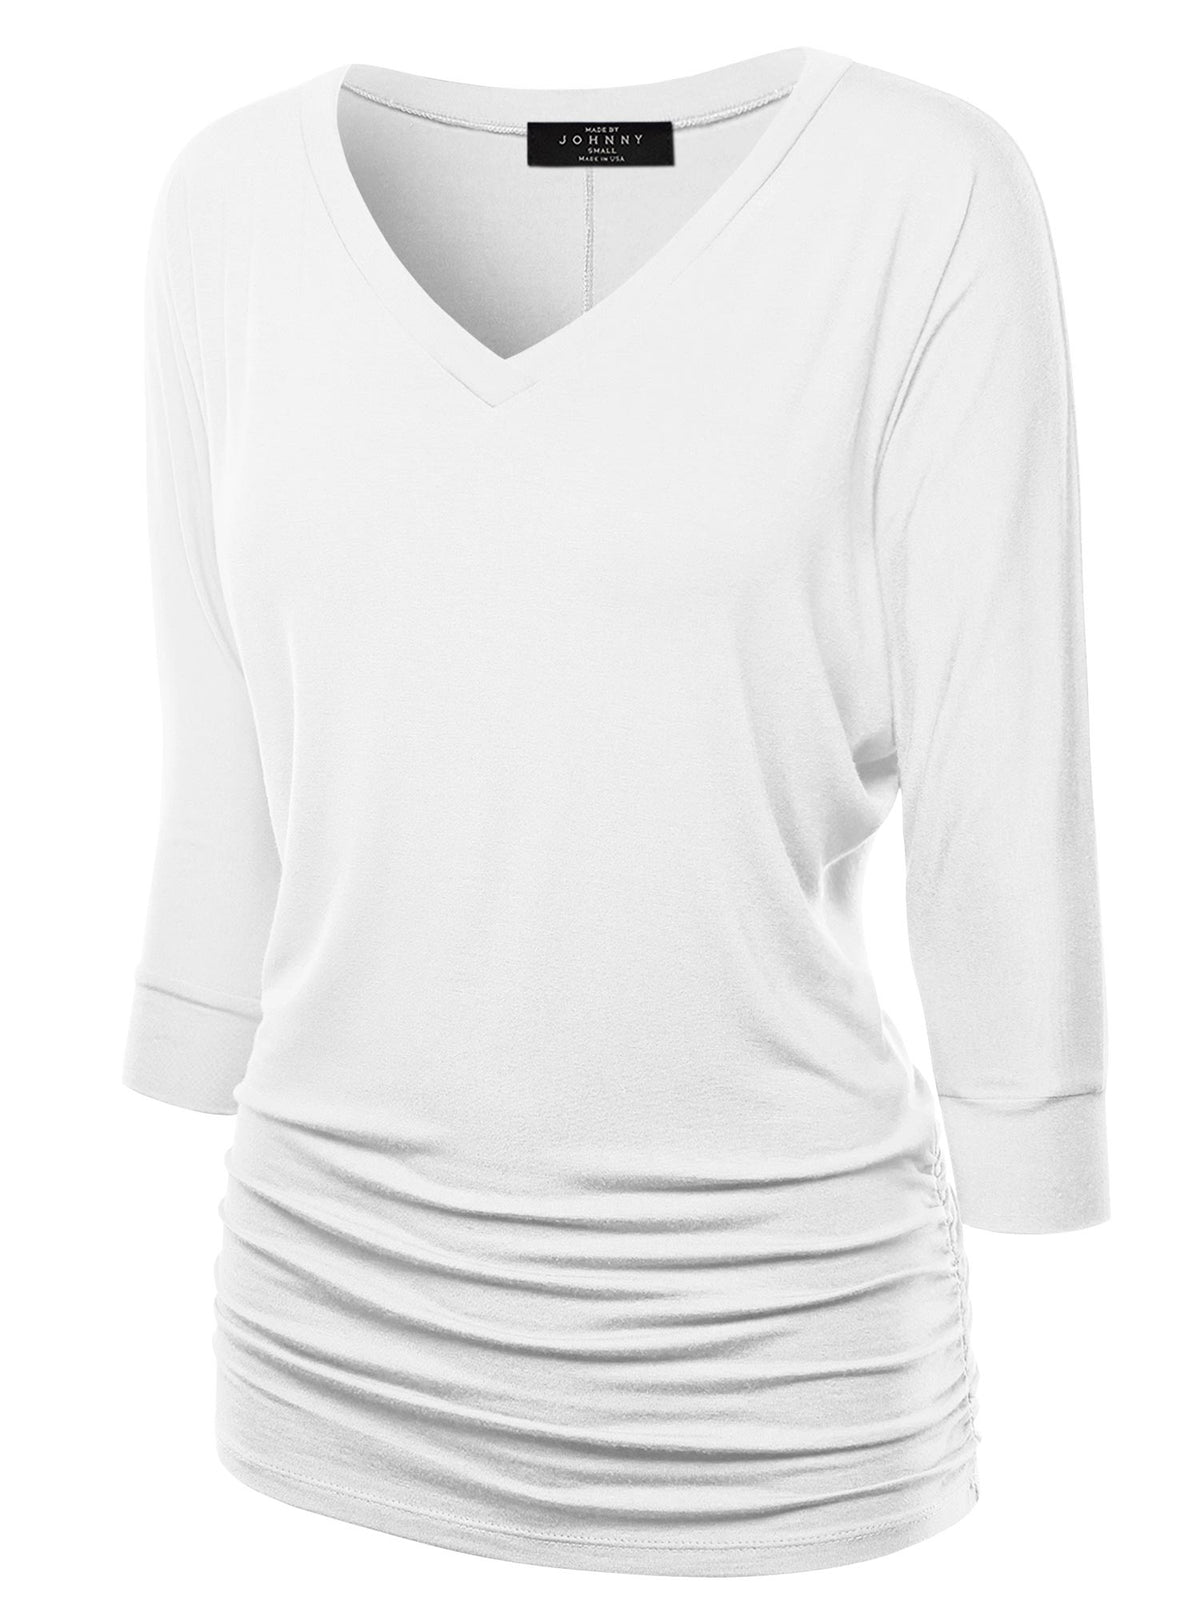 Everyday Solid Color Women's V-Neck 3/4 Sleeve Drape Dolman Shirt Top with Side Shirring